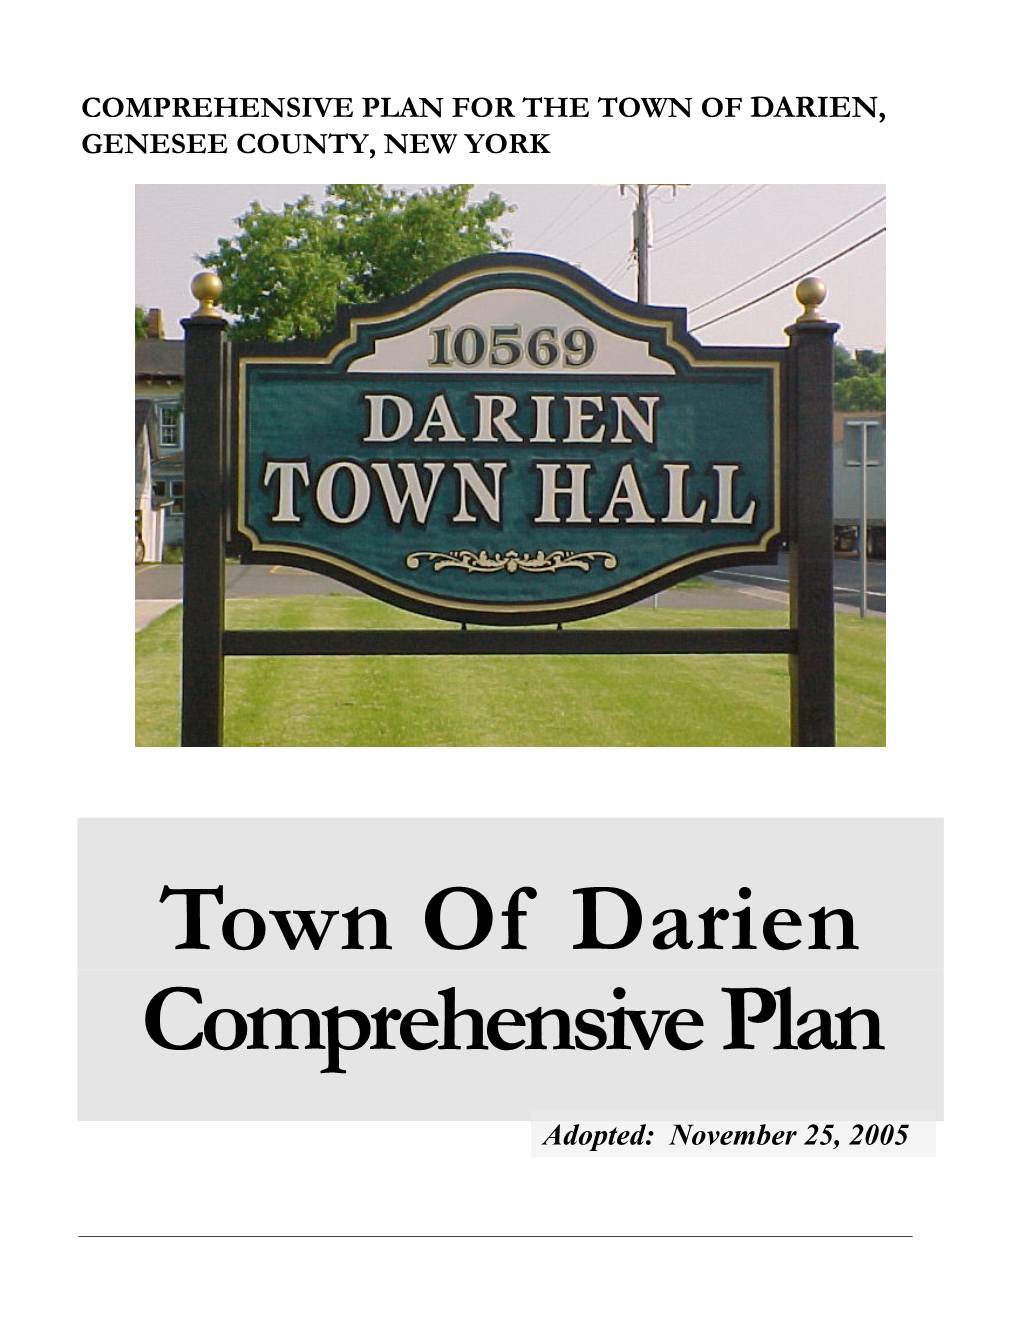 Ammended Comprehensive Plan for the Town Of